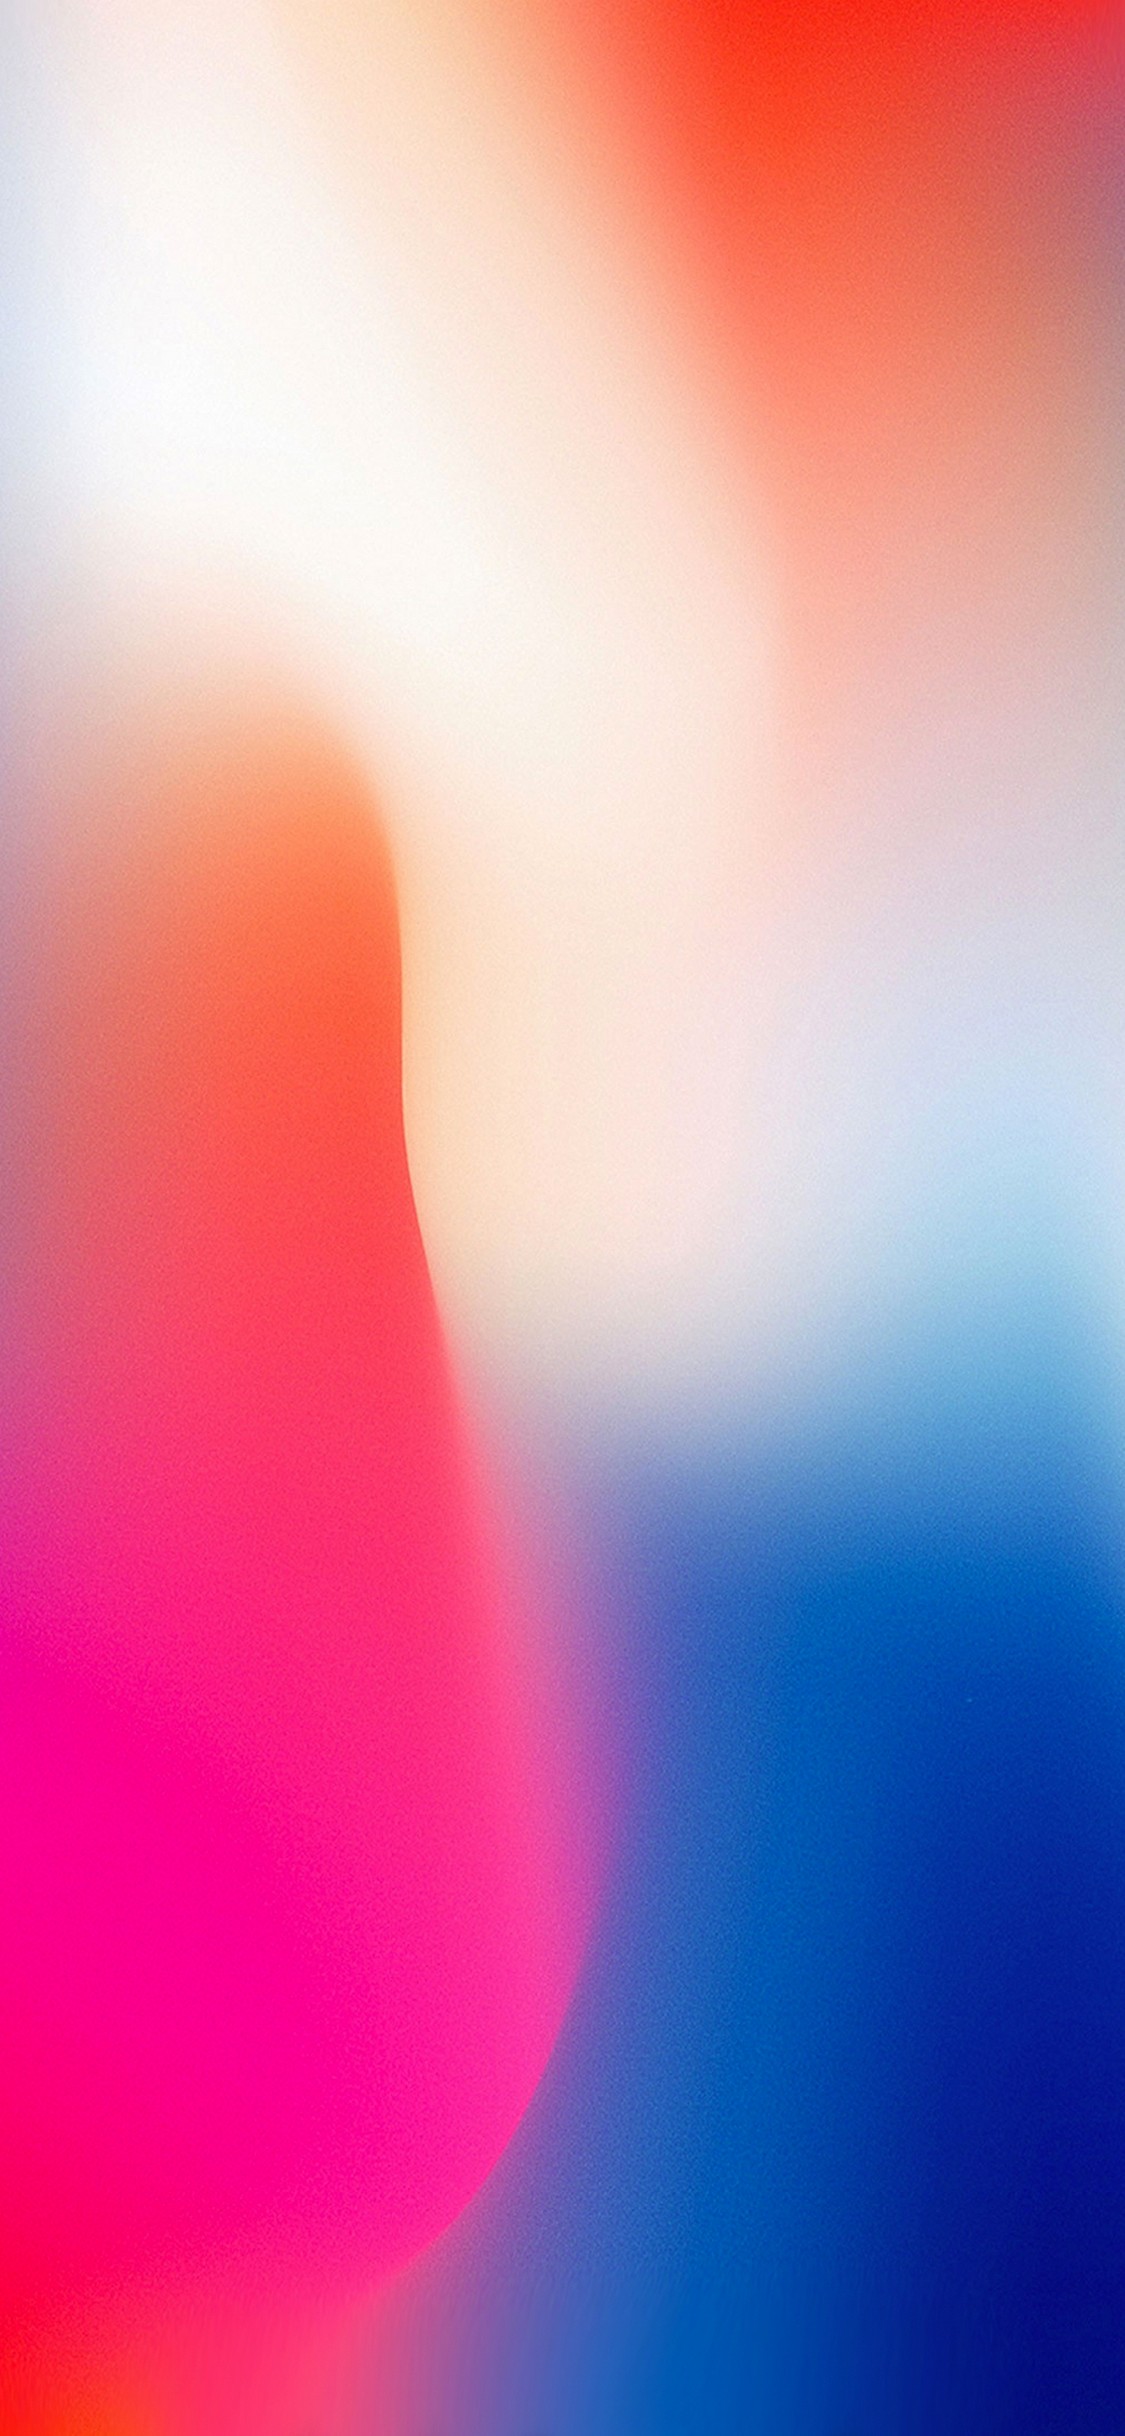 Iphone X Wallpaper New With High-resolution Pixel - Apple Iphone X Wallpaper Hd - HD Wallpaper 